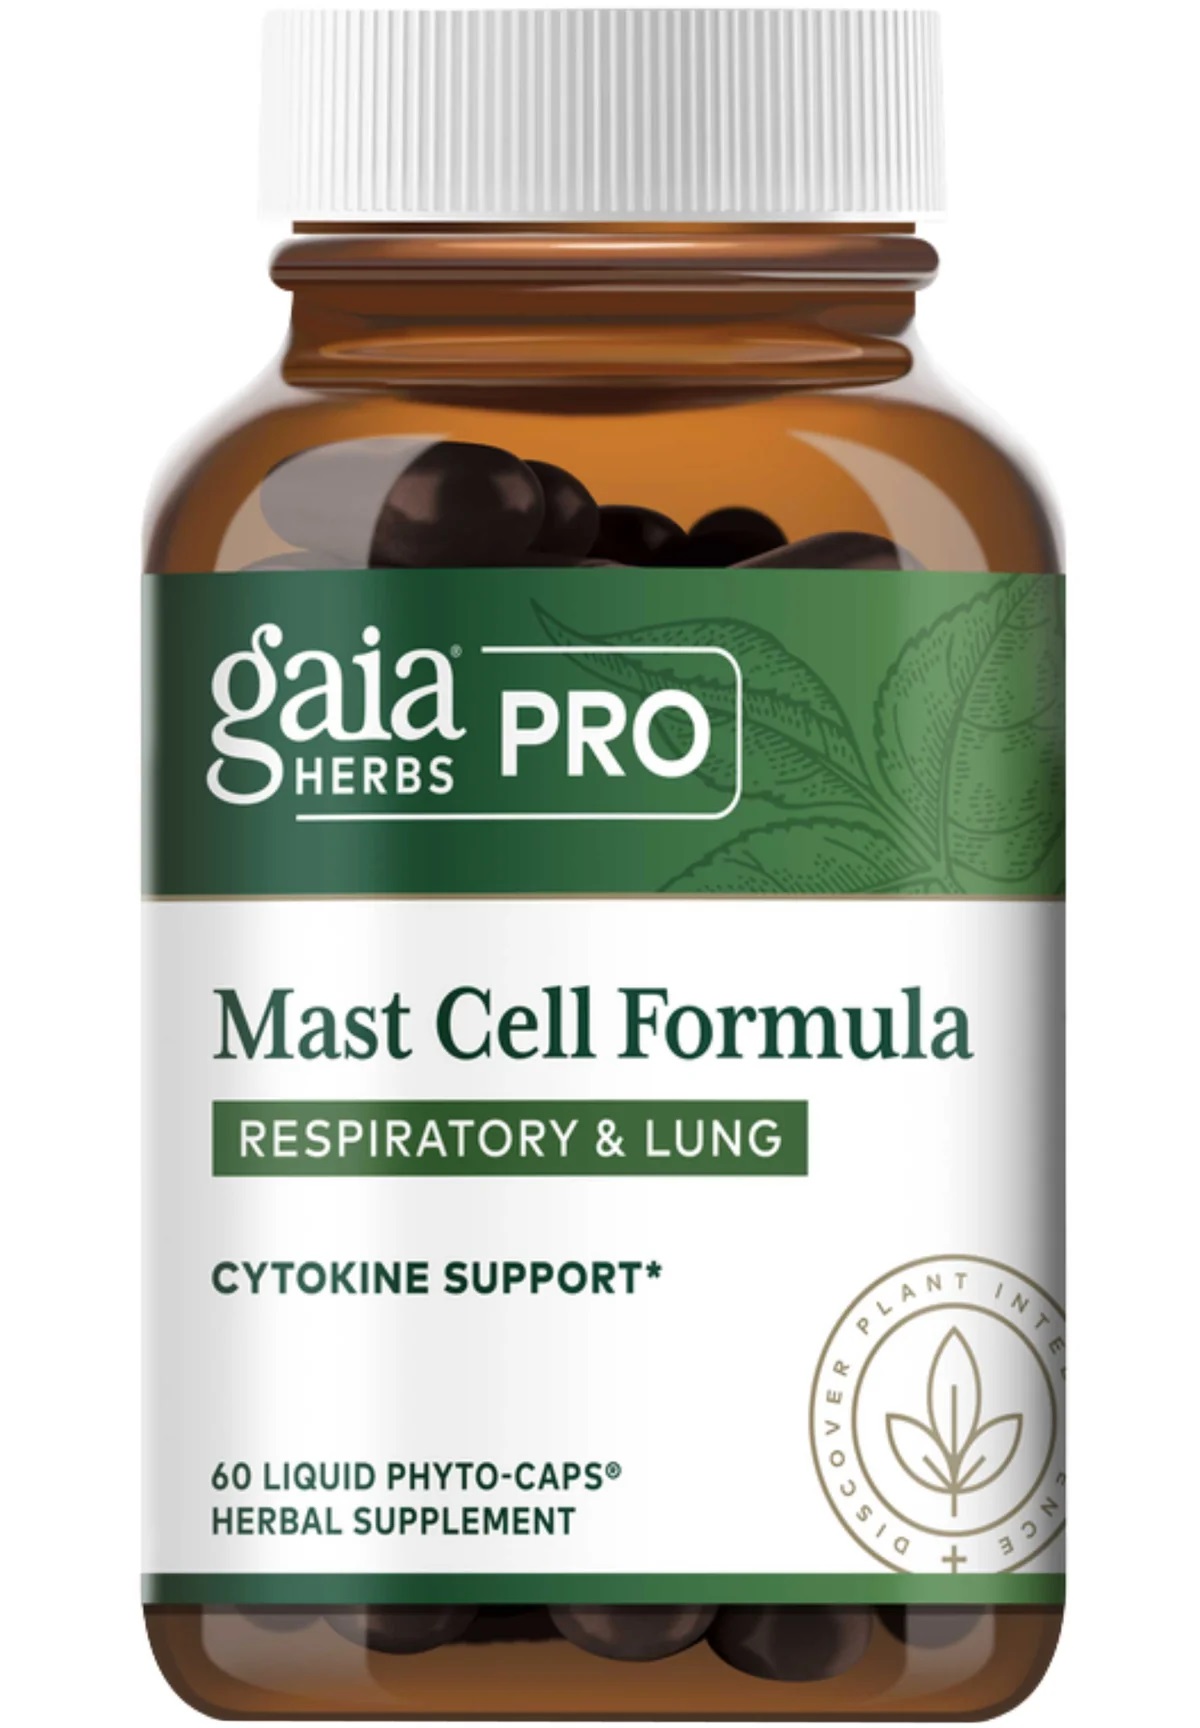 Mast Cell Formula: Respiratory & Lung, 60 Phytocaps